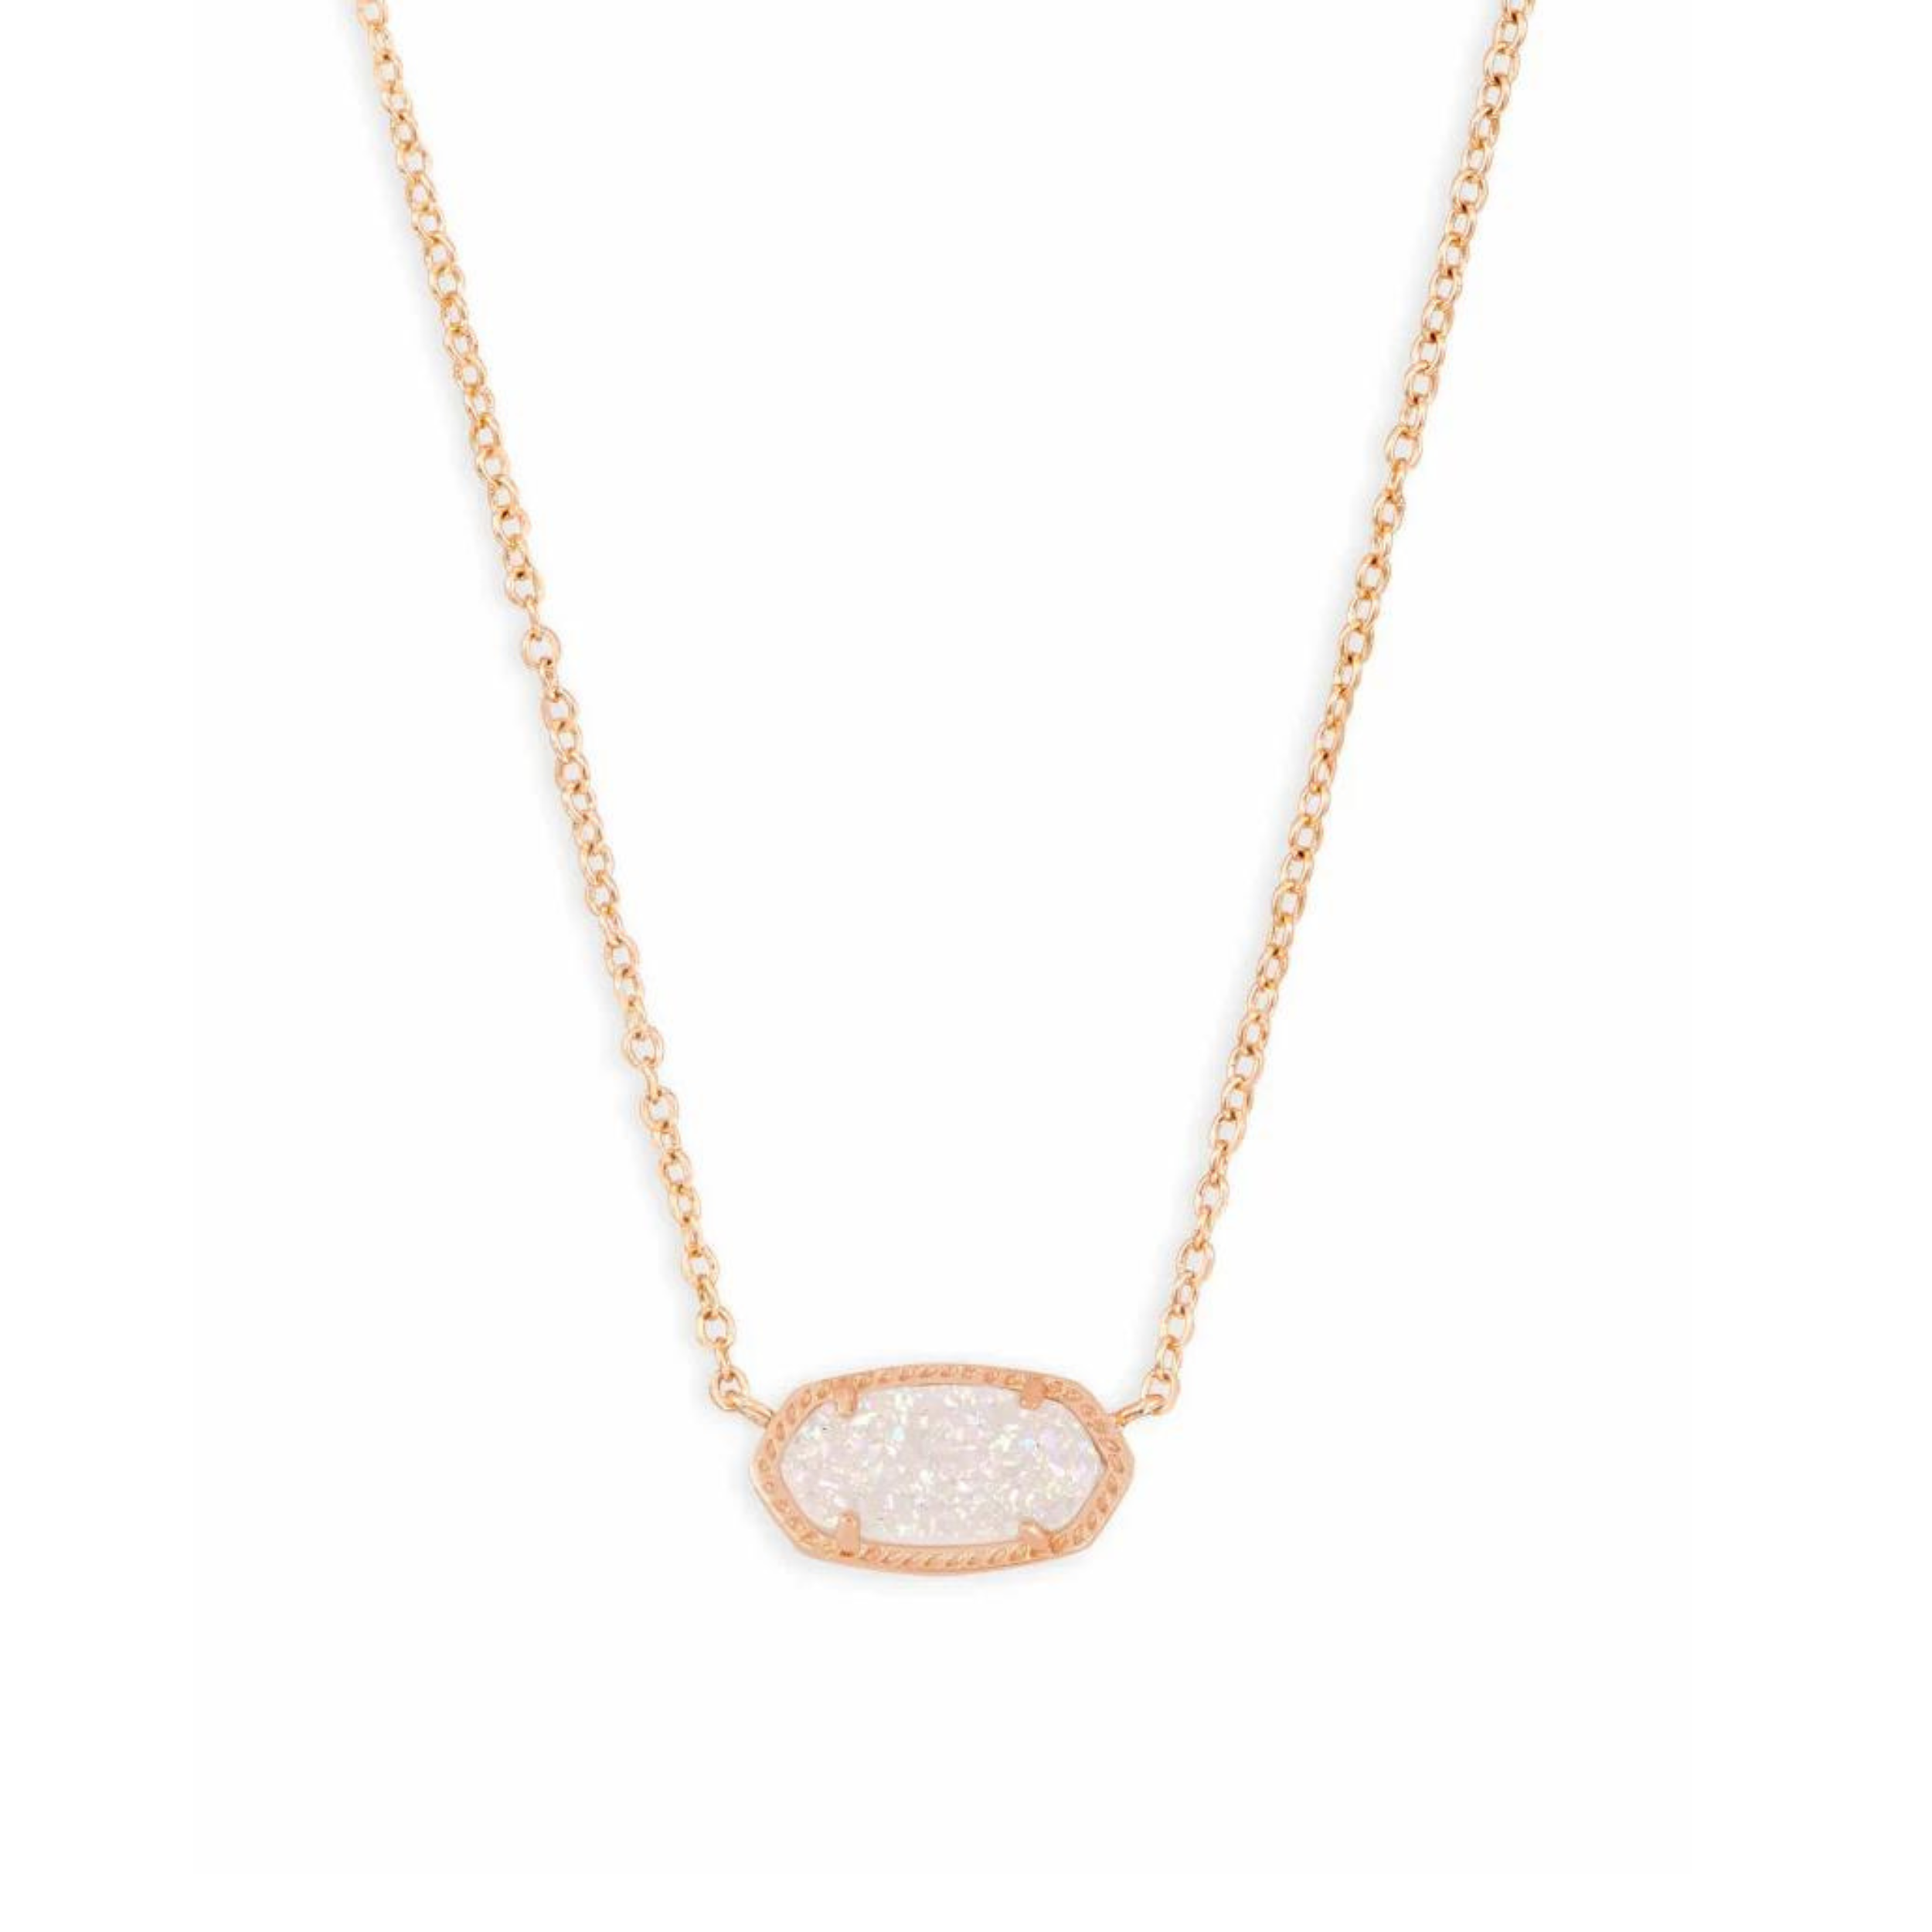 Rose gold pendant necklace with a iridesecnt drusy stone, pictured on a white background.